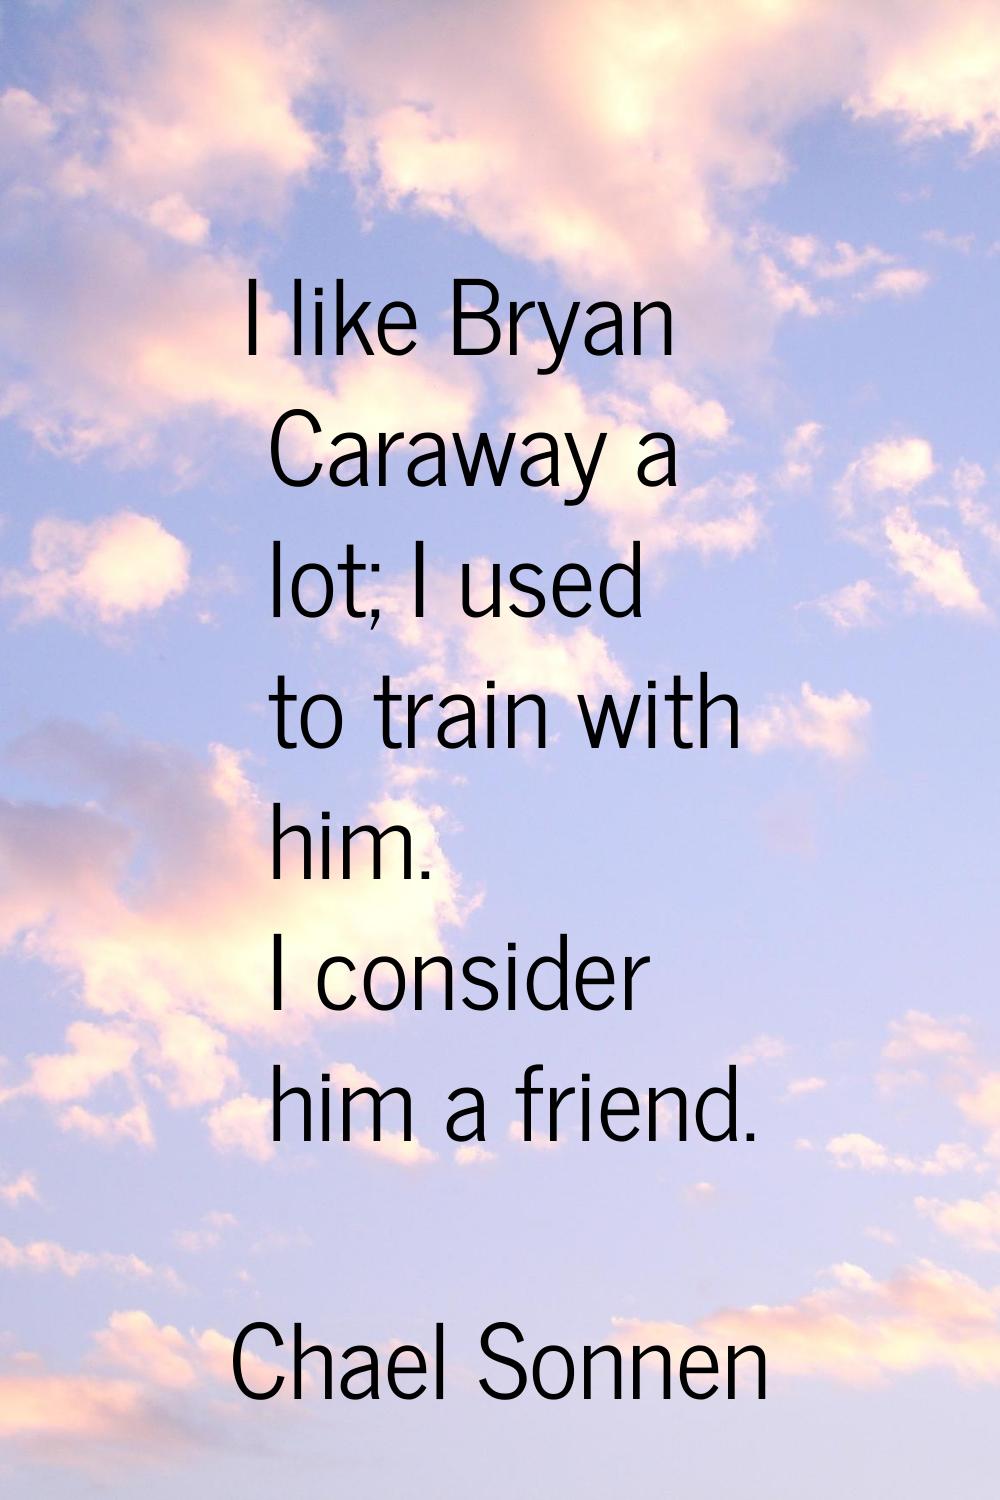 I like Bryan Caraway a lot; I used to train with him. I consider him a friend.